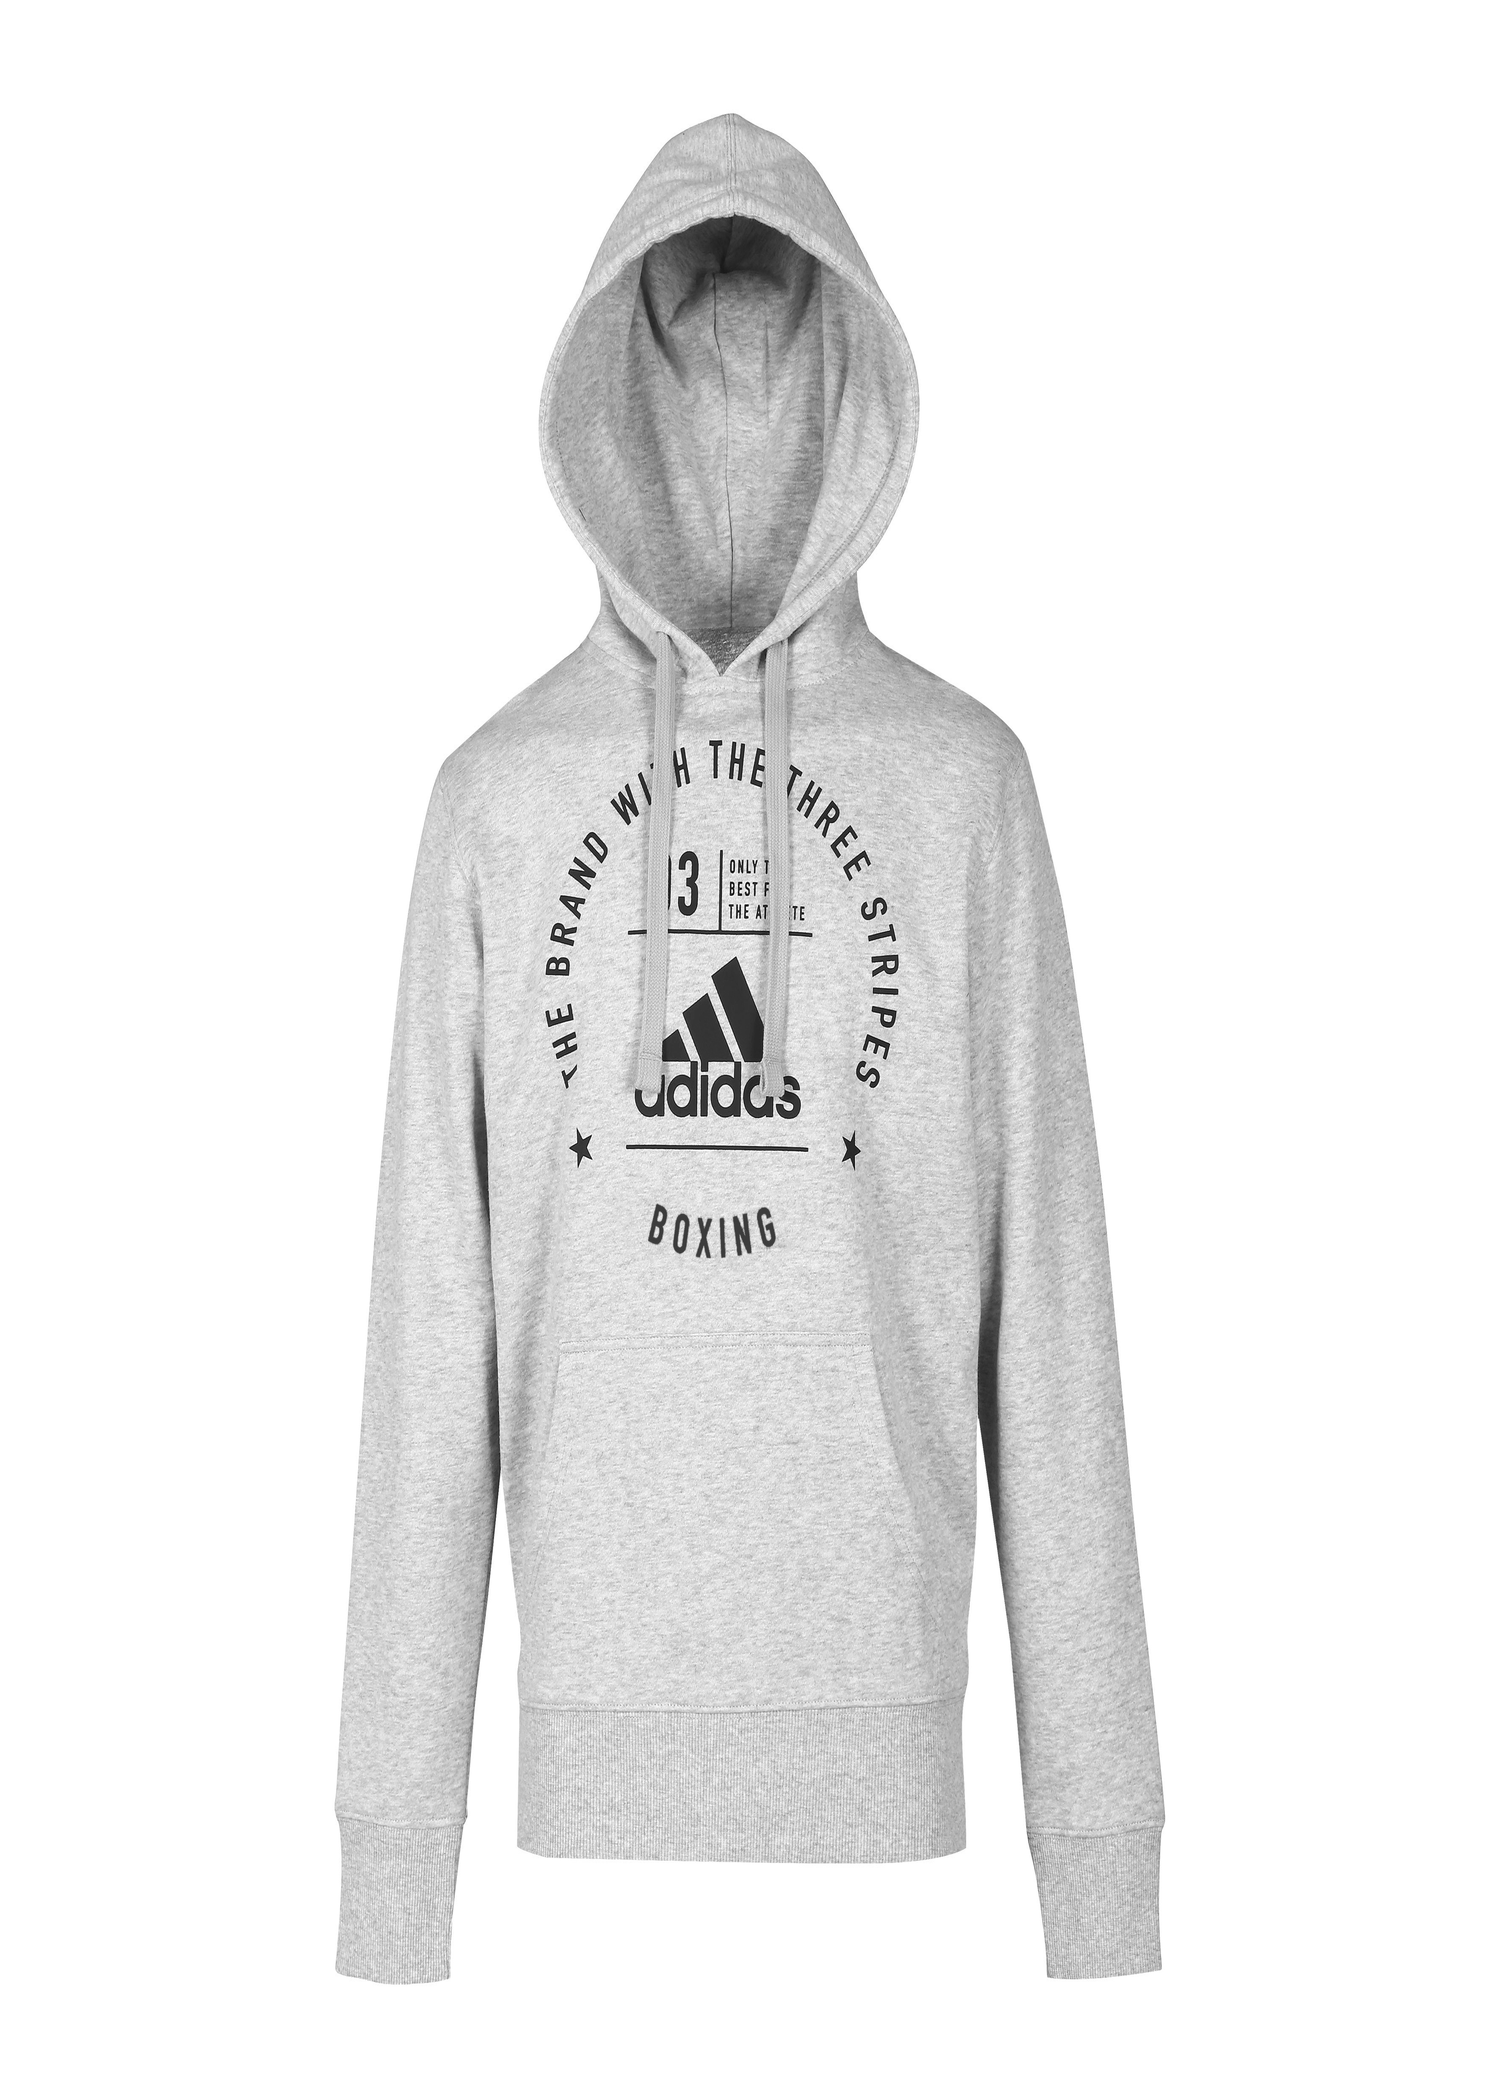 Adidas Boxing Community Hoodie- for Man, Woman, Unisex - for Gym, Workout, Boxing, Exercise, Weightlifting, Fitness, Running, Casual wear - Long Sleeves - 80% Polyester, 20% Cotton